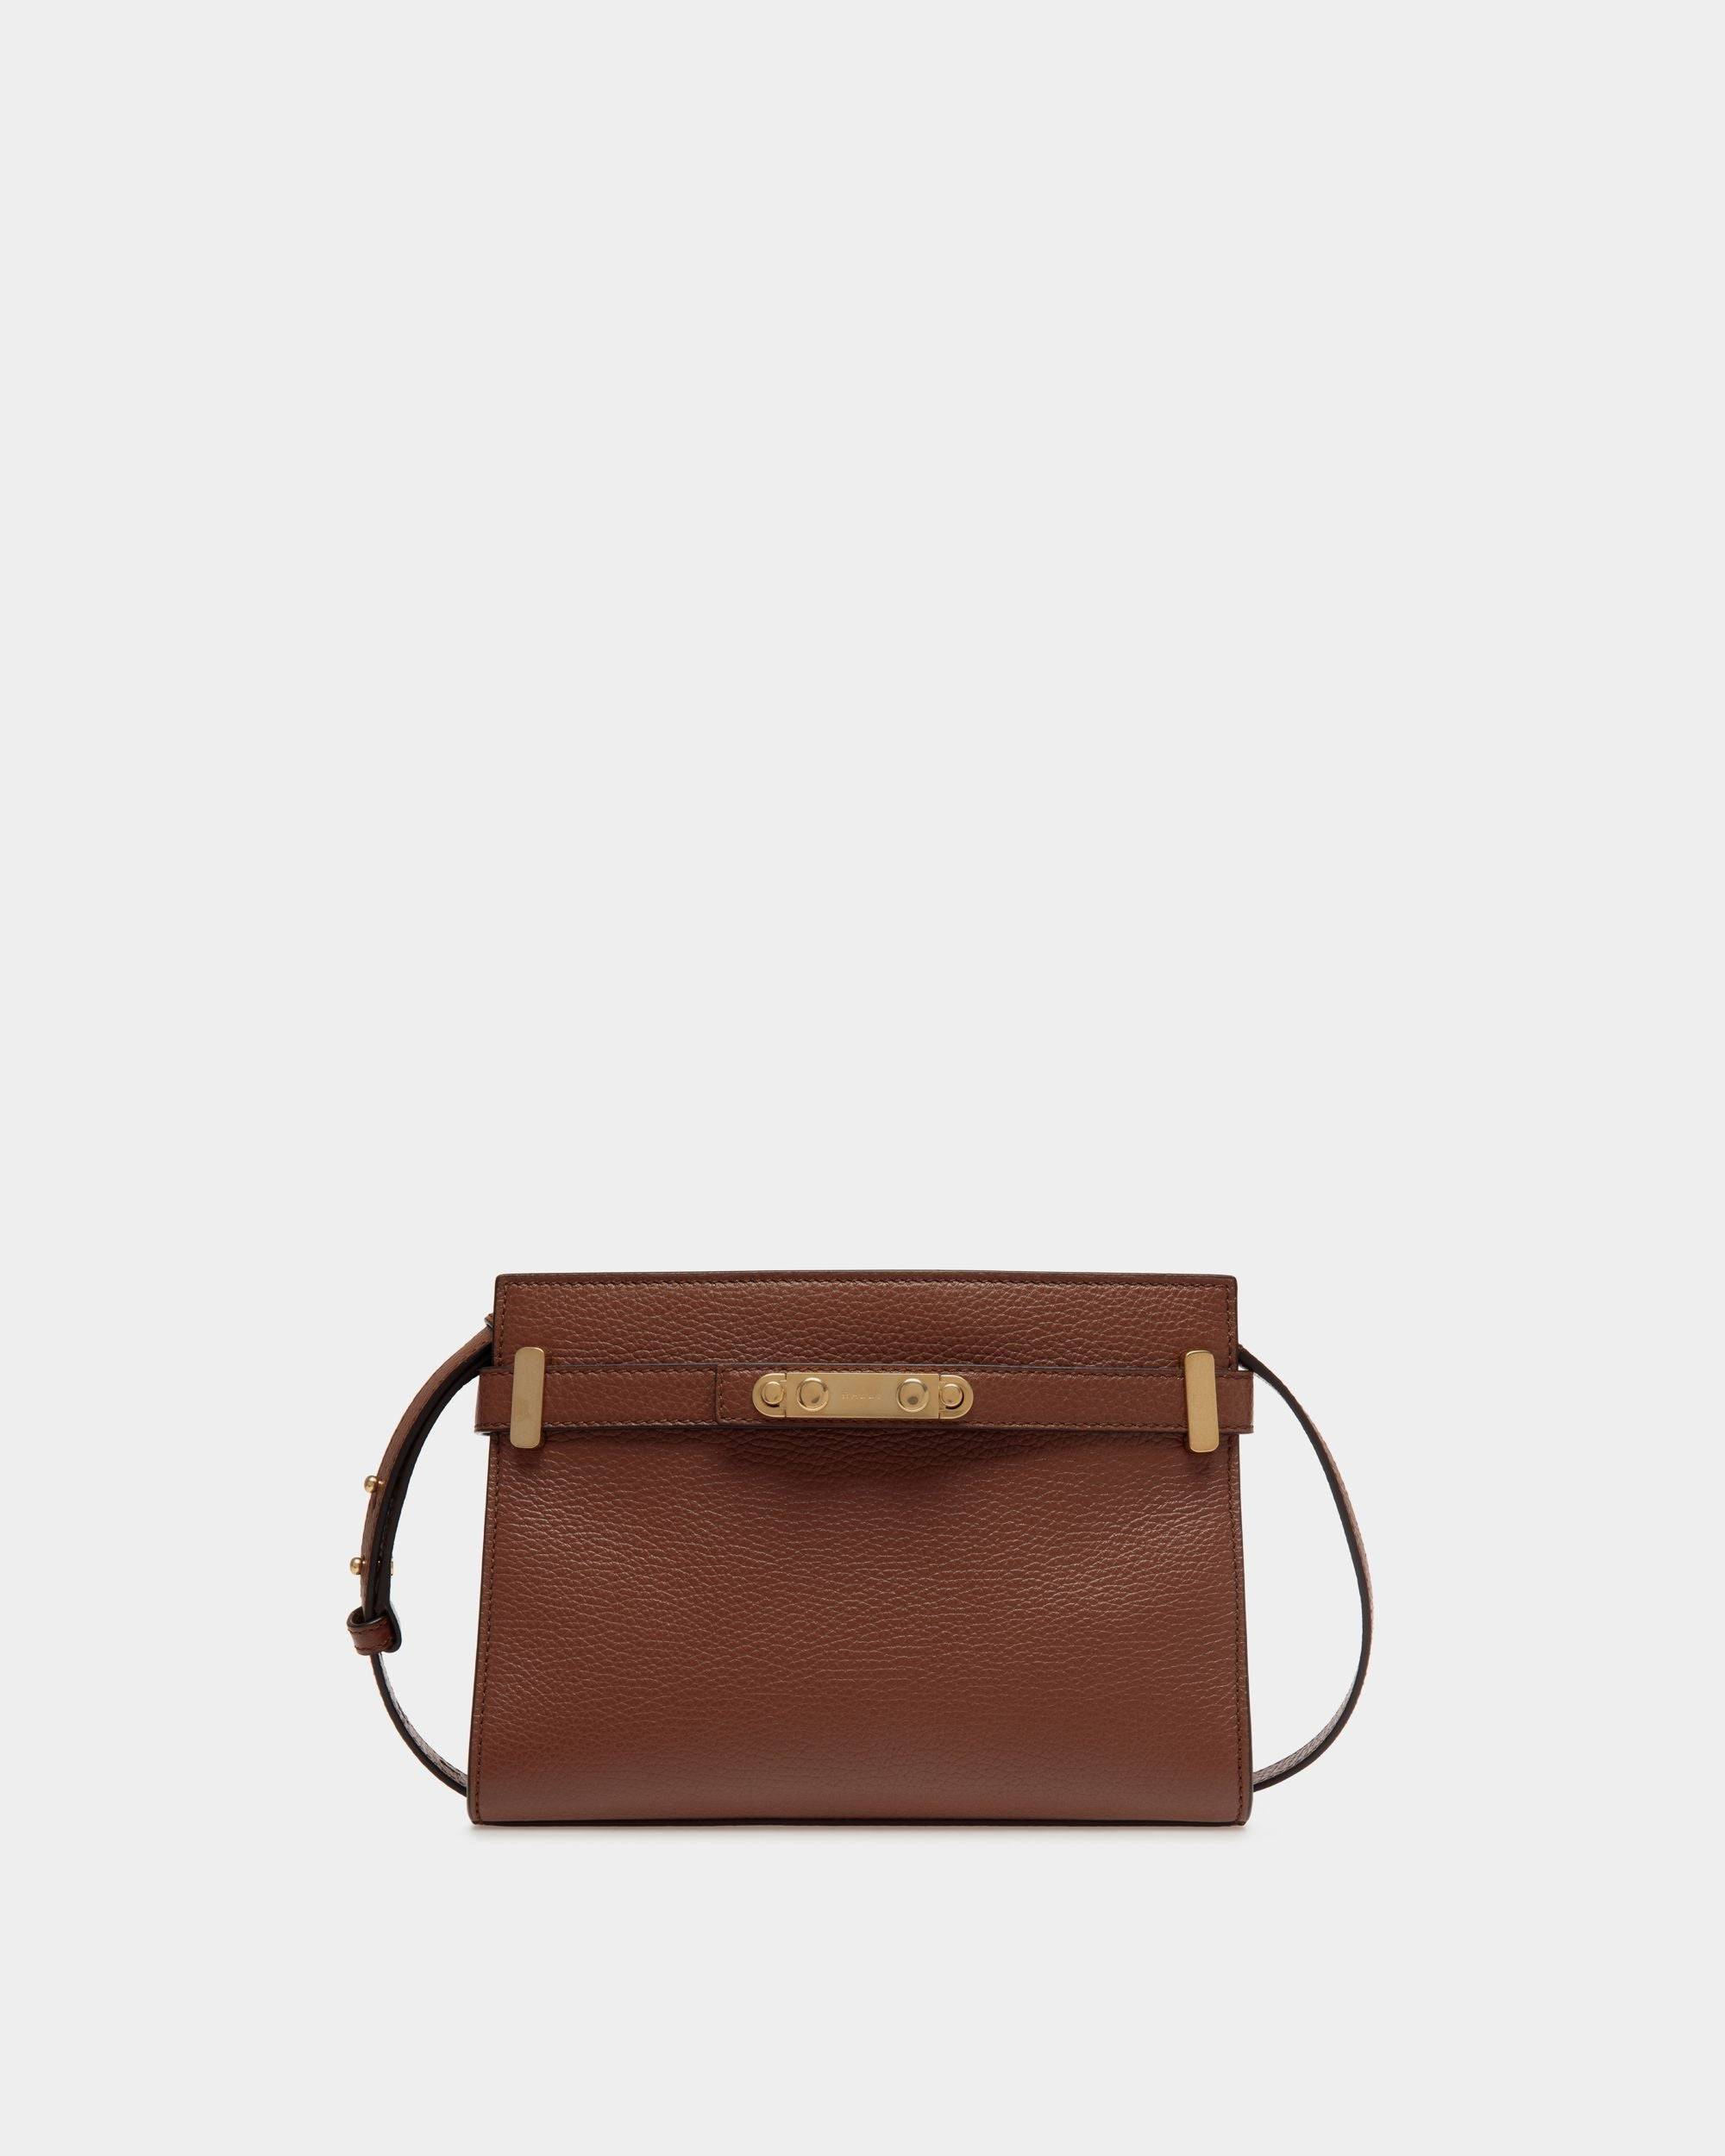 Women's Carriage Crossbody Bag in Brown Grained Leather | Bally | Still Life Front